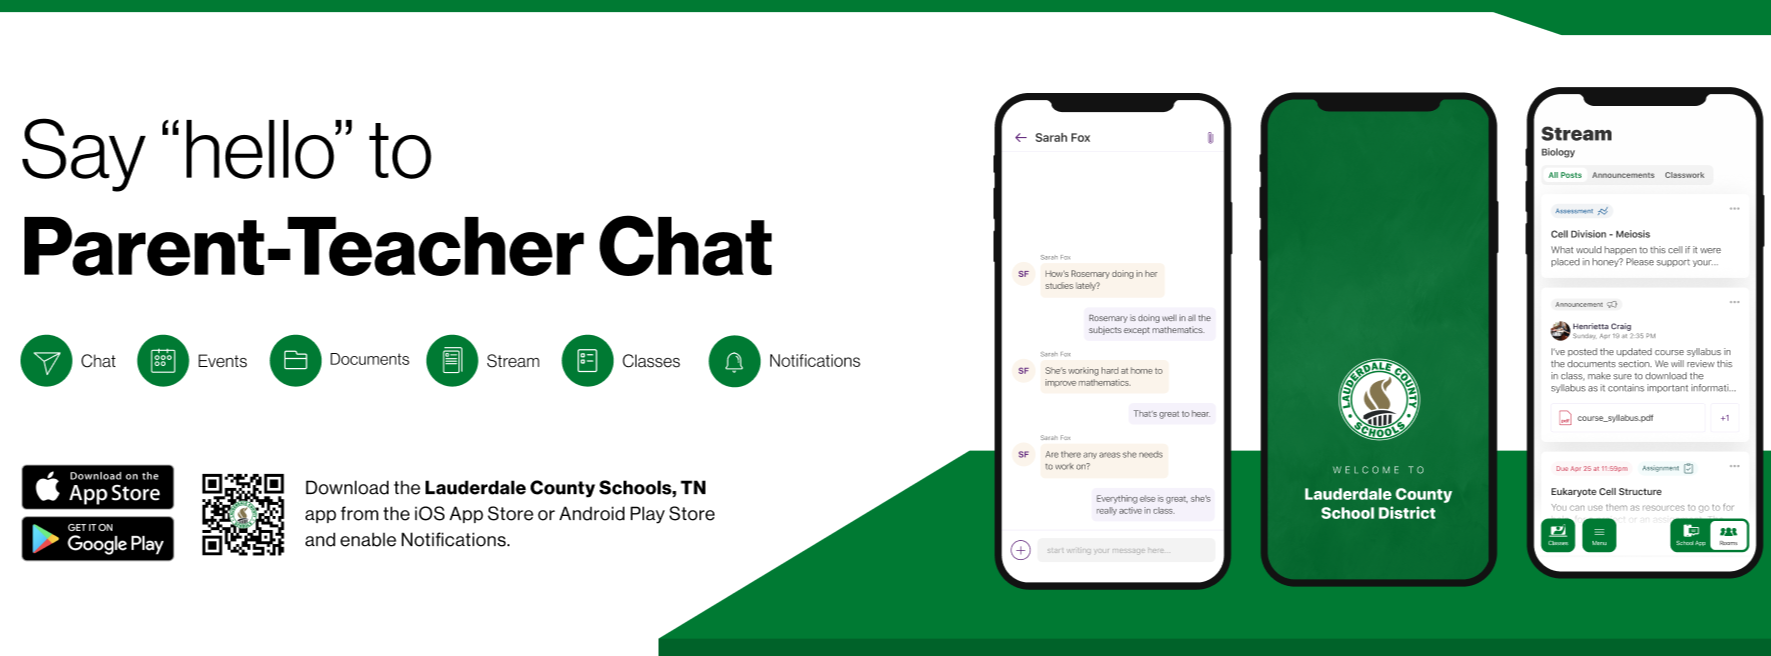 text: Say hello to parent-teacher chat. chat - events - documents - stream - classes - notifications, download the Lauderdale County Schools TN app from the iOS App Store or Android Play Store and enable Notifications. image of open mobile app